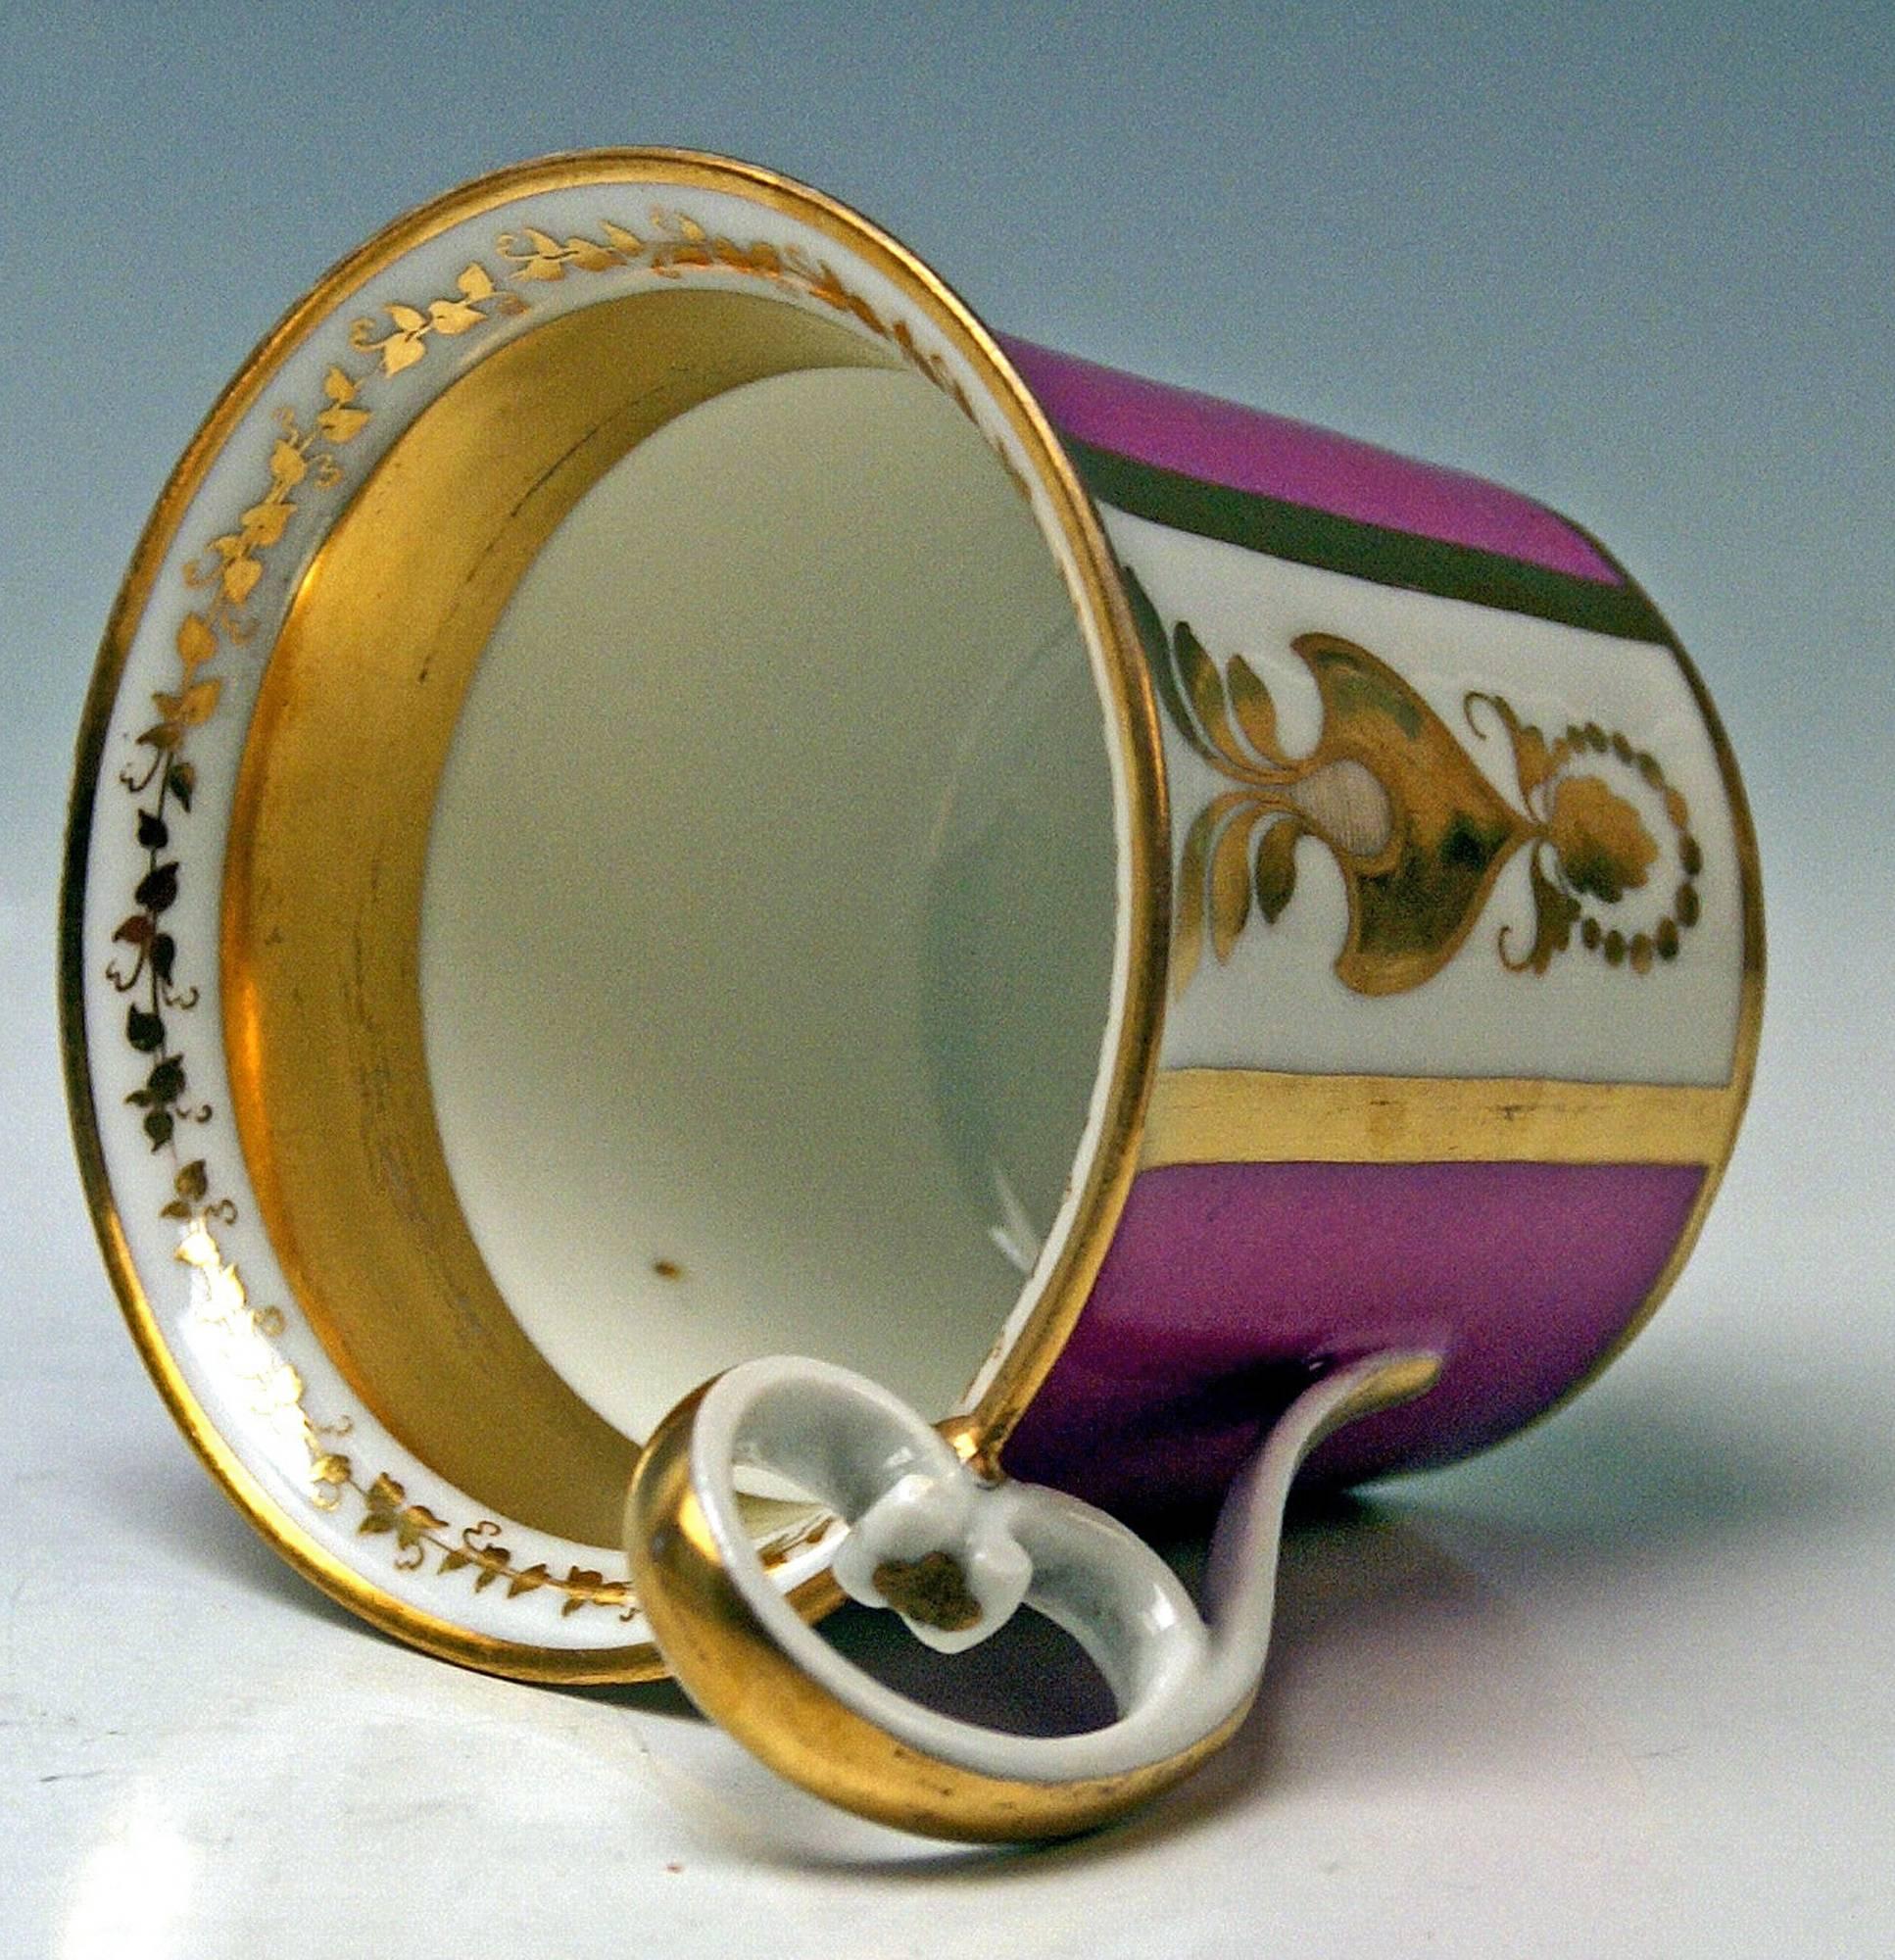 Early 19th Century Vienna Imperial Porcelain Cup Saucer Saint Stephen's Cathedral Austria, 1821